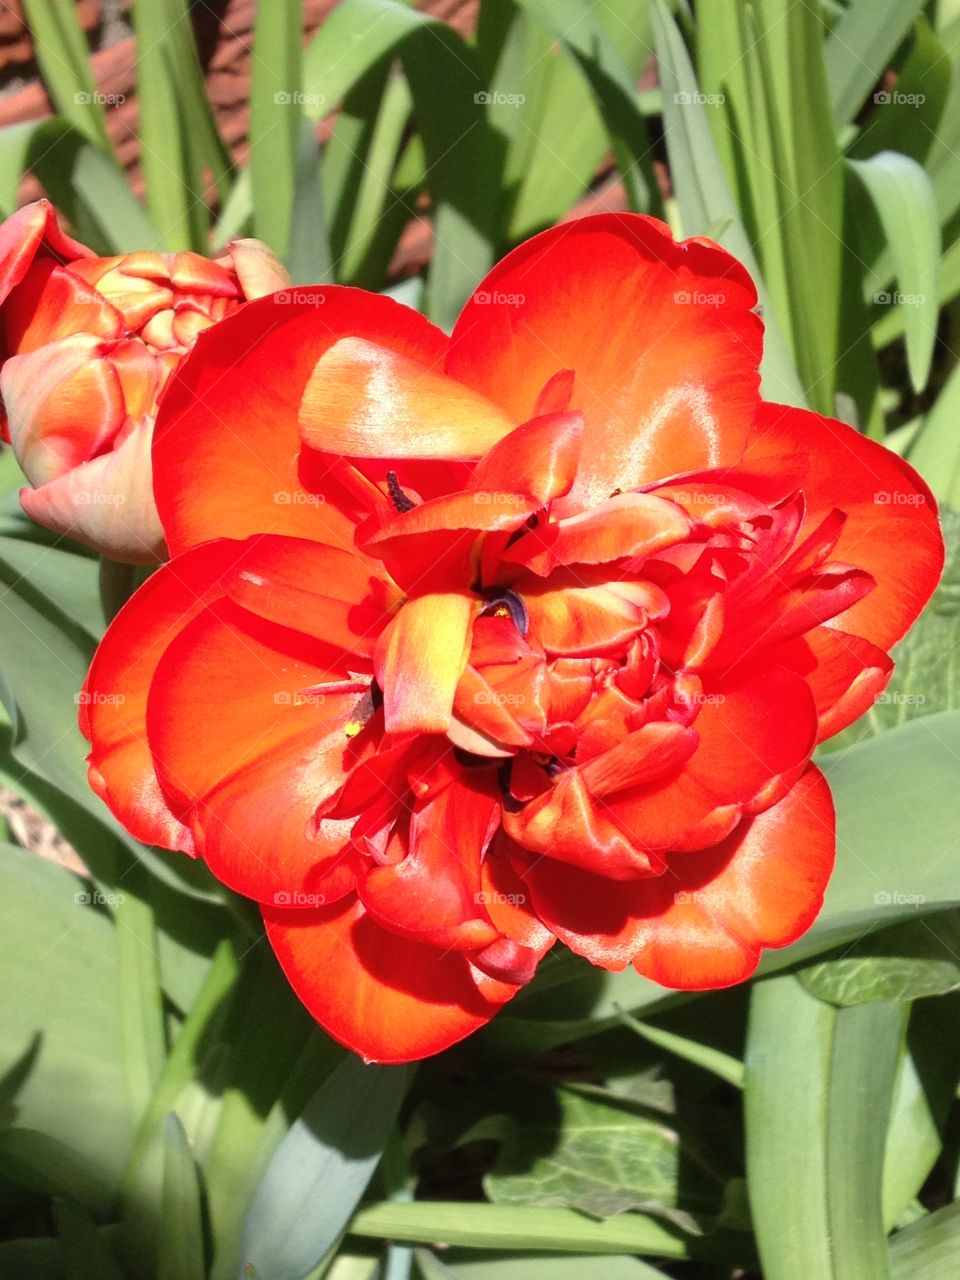 Large blooming red tulip fully opened